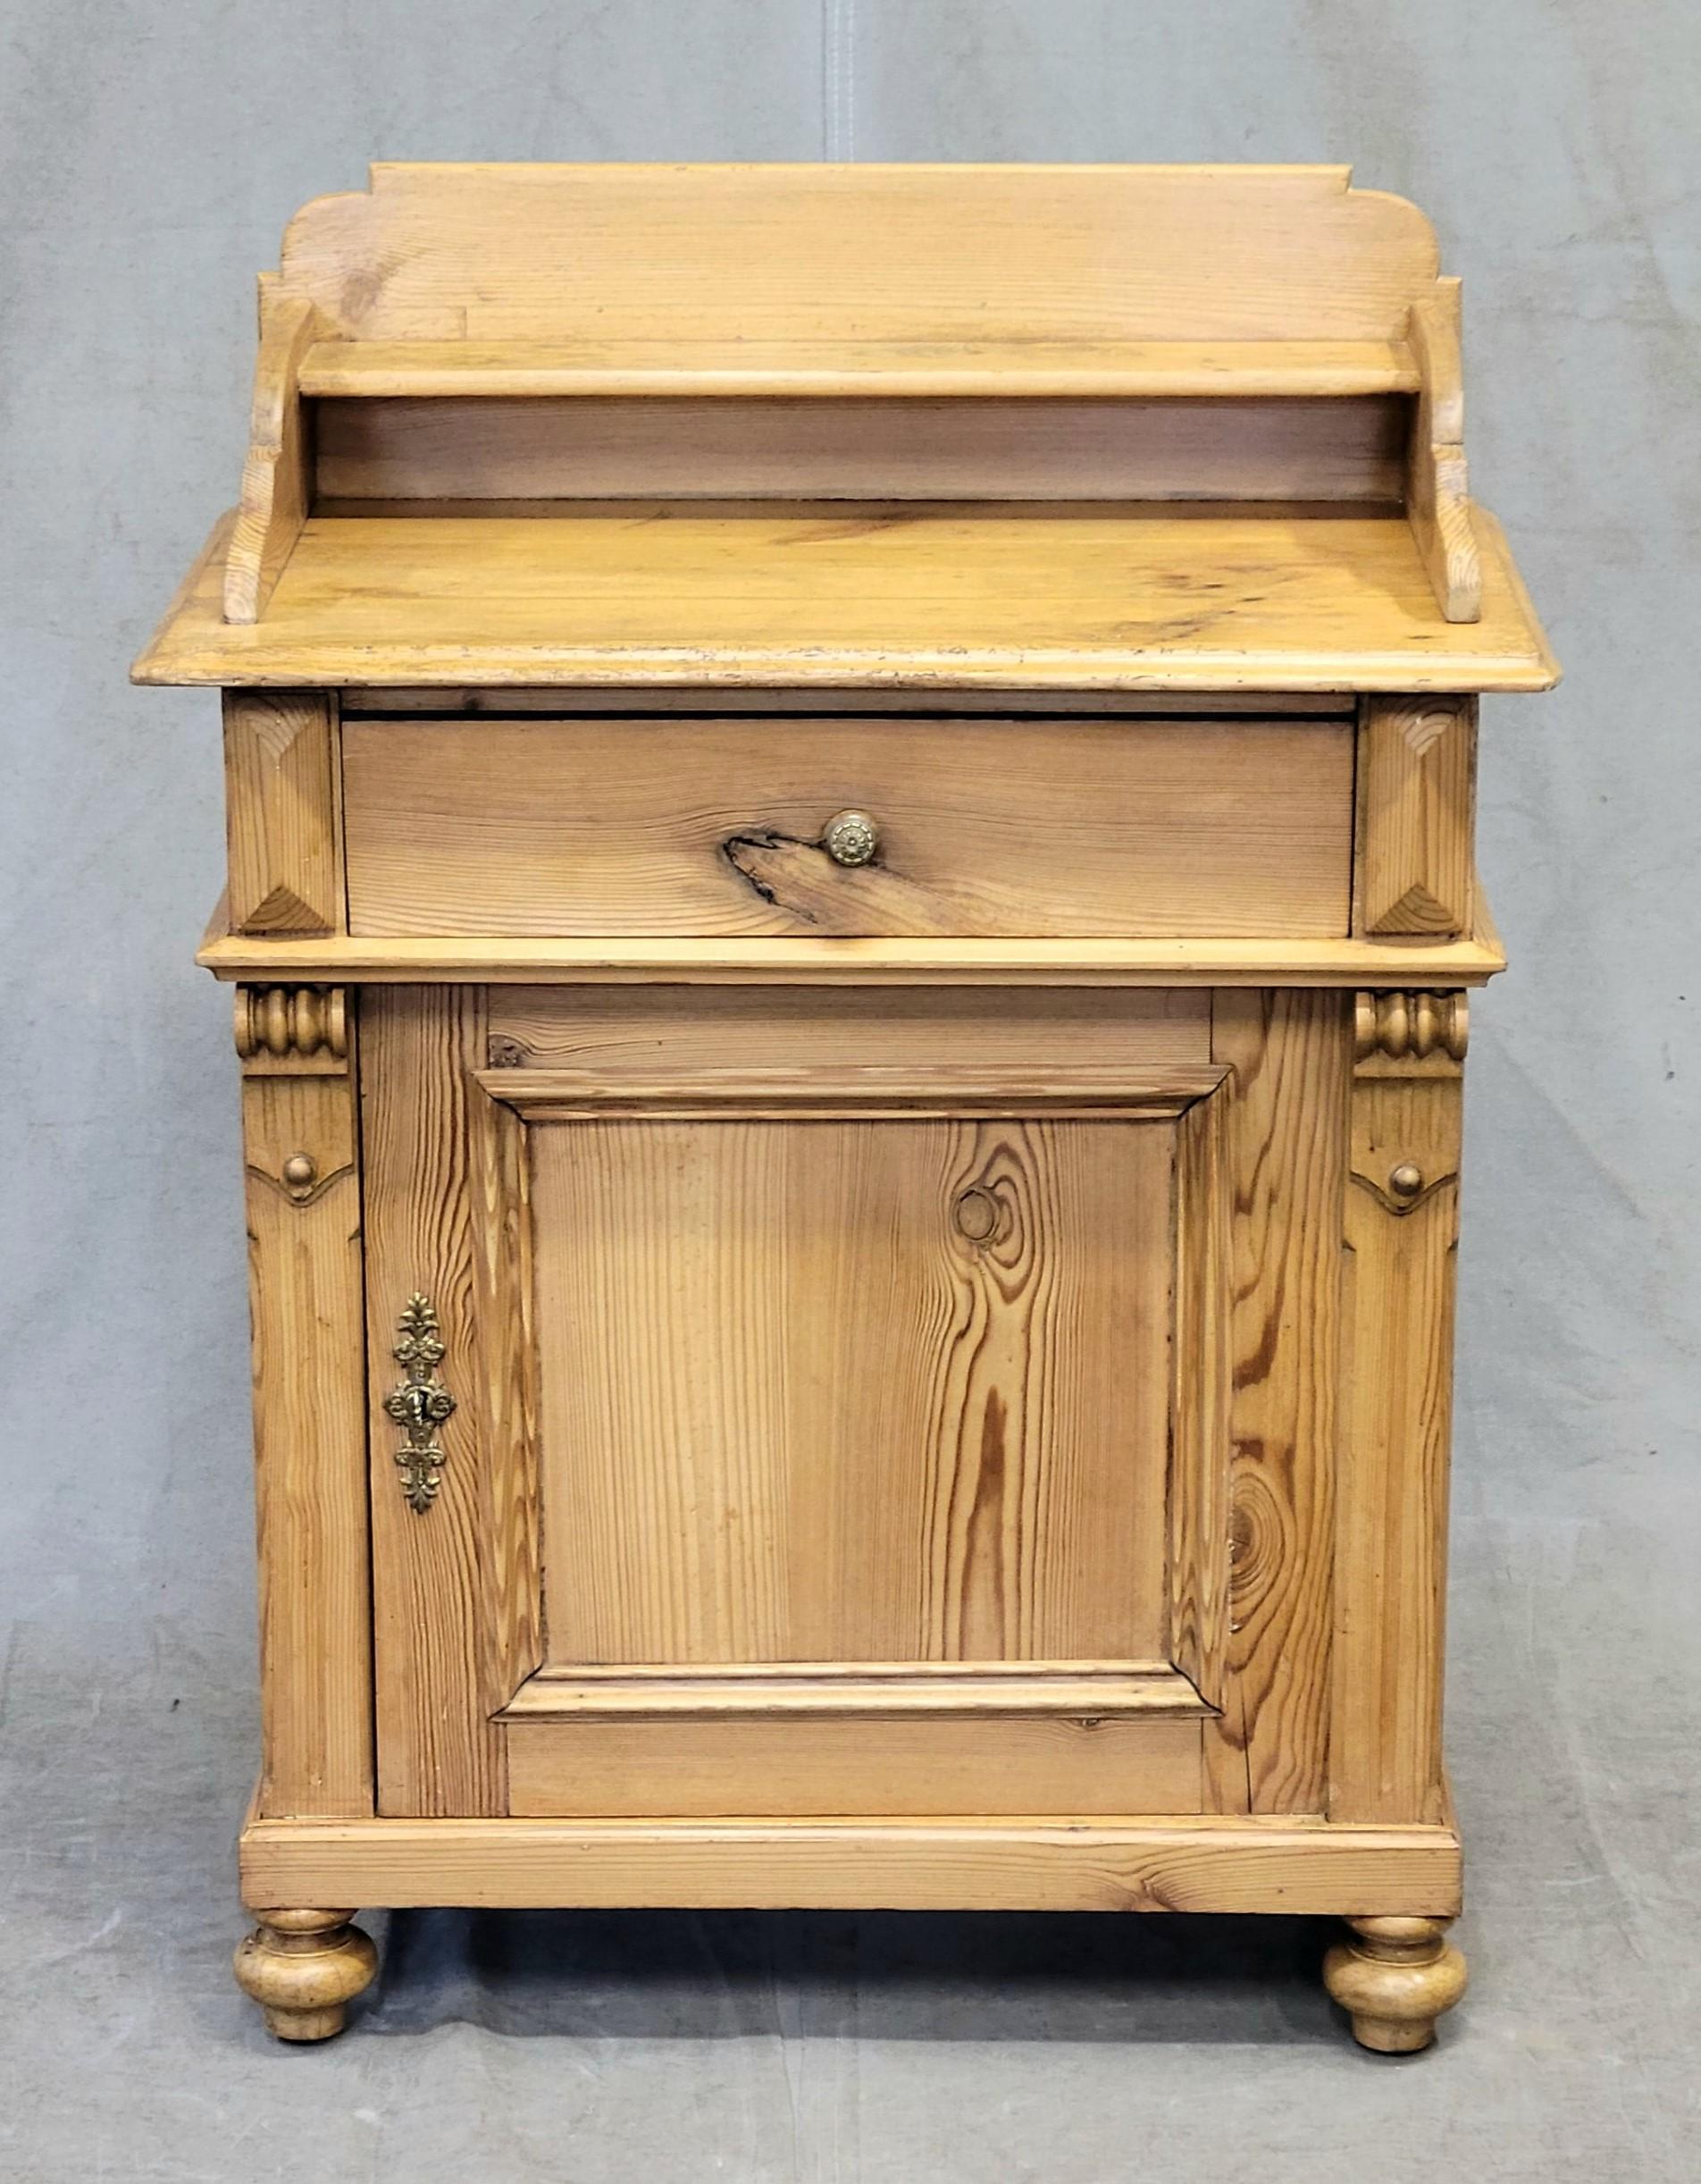 An antique sweet and petite late 1800s European, likely German, pine commode cabinet. Hand carved accents, including a crown with shelf, and distressed pine from age and wear give this piece such character. Old brass hardware is a wonderful accent.